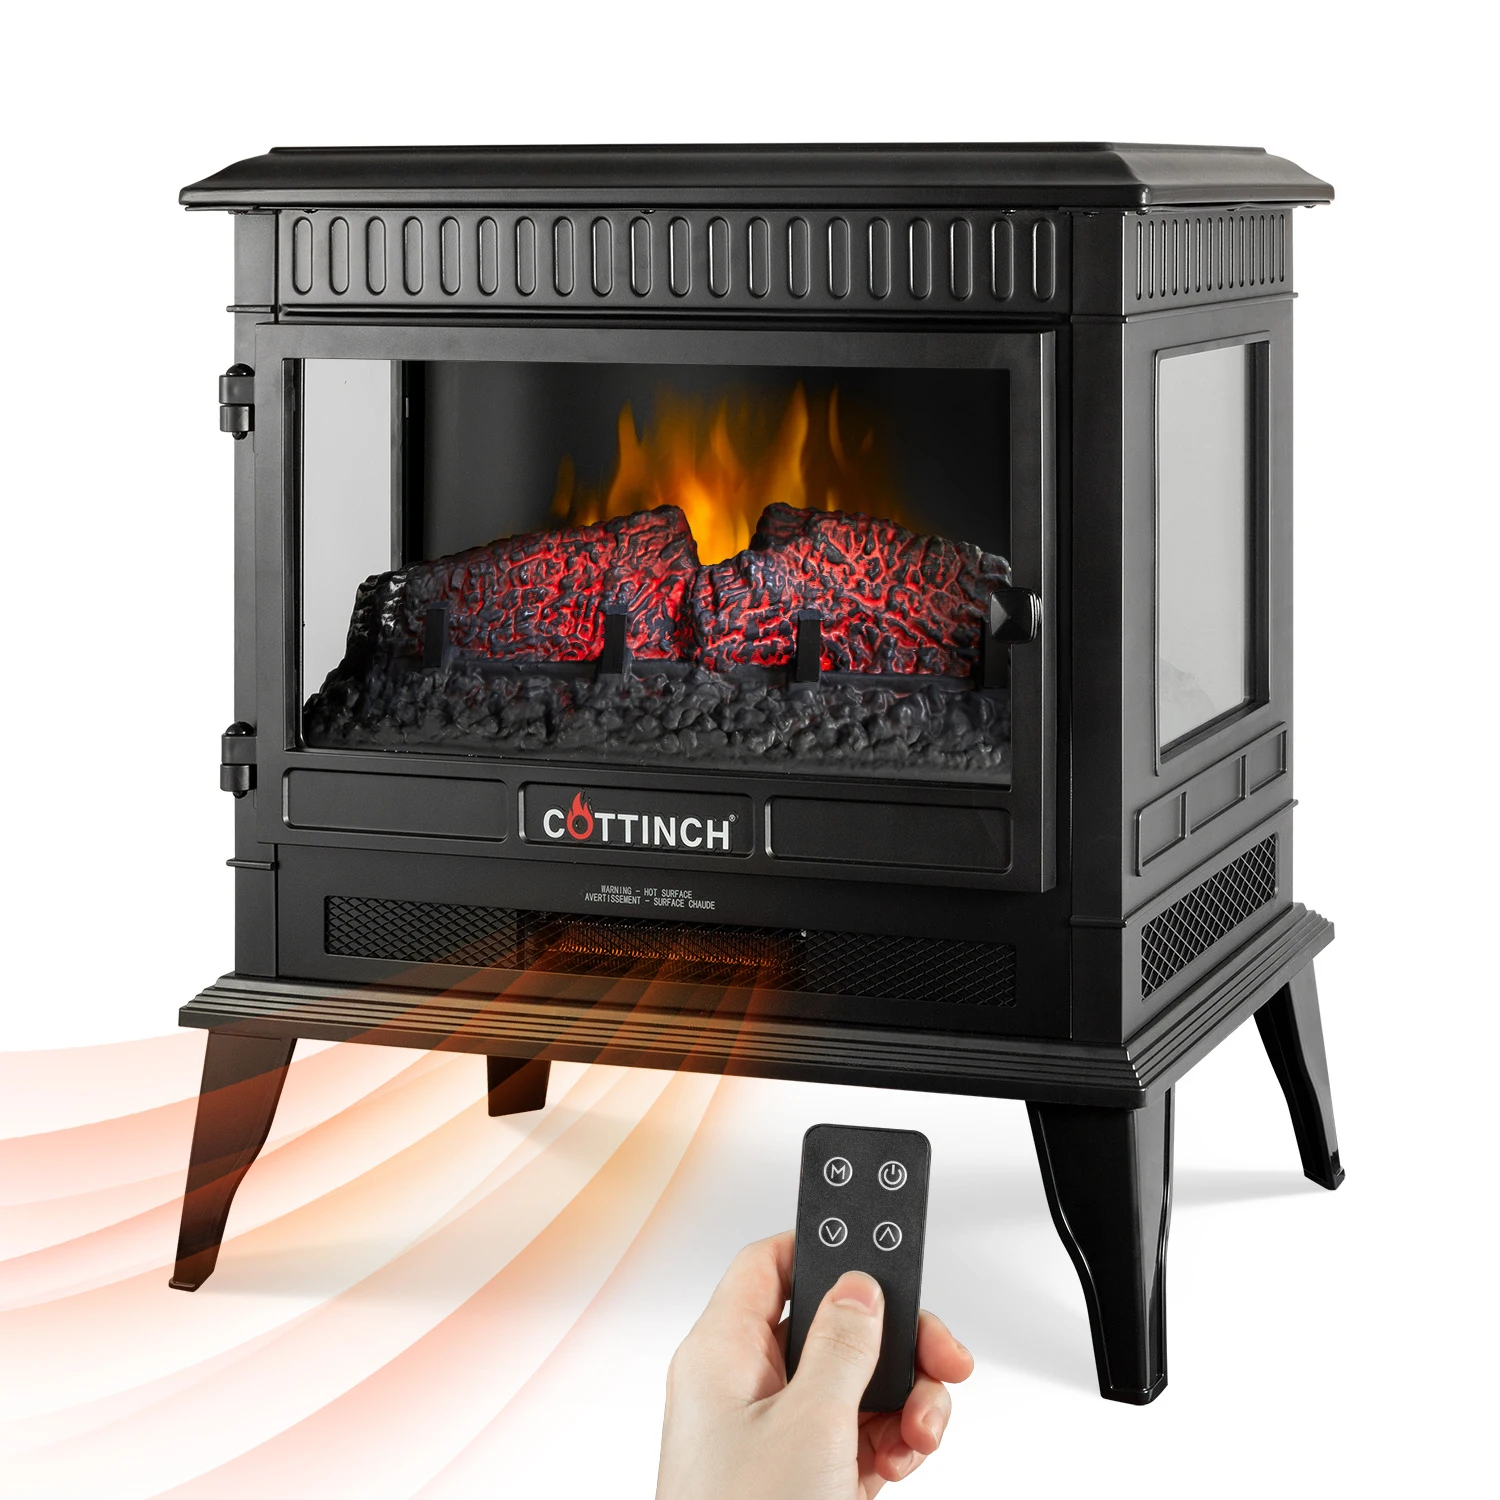 

Digital Electric Fireplace with Remote Control LED Emulational Flame Room Firebox Heater Stove Decoration Warm Air Blower